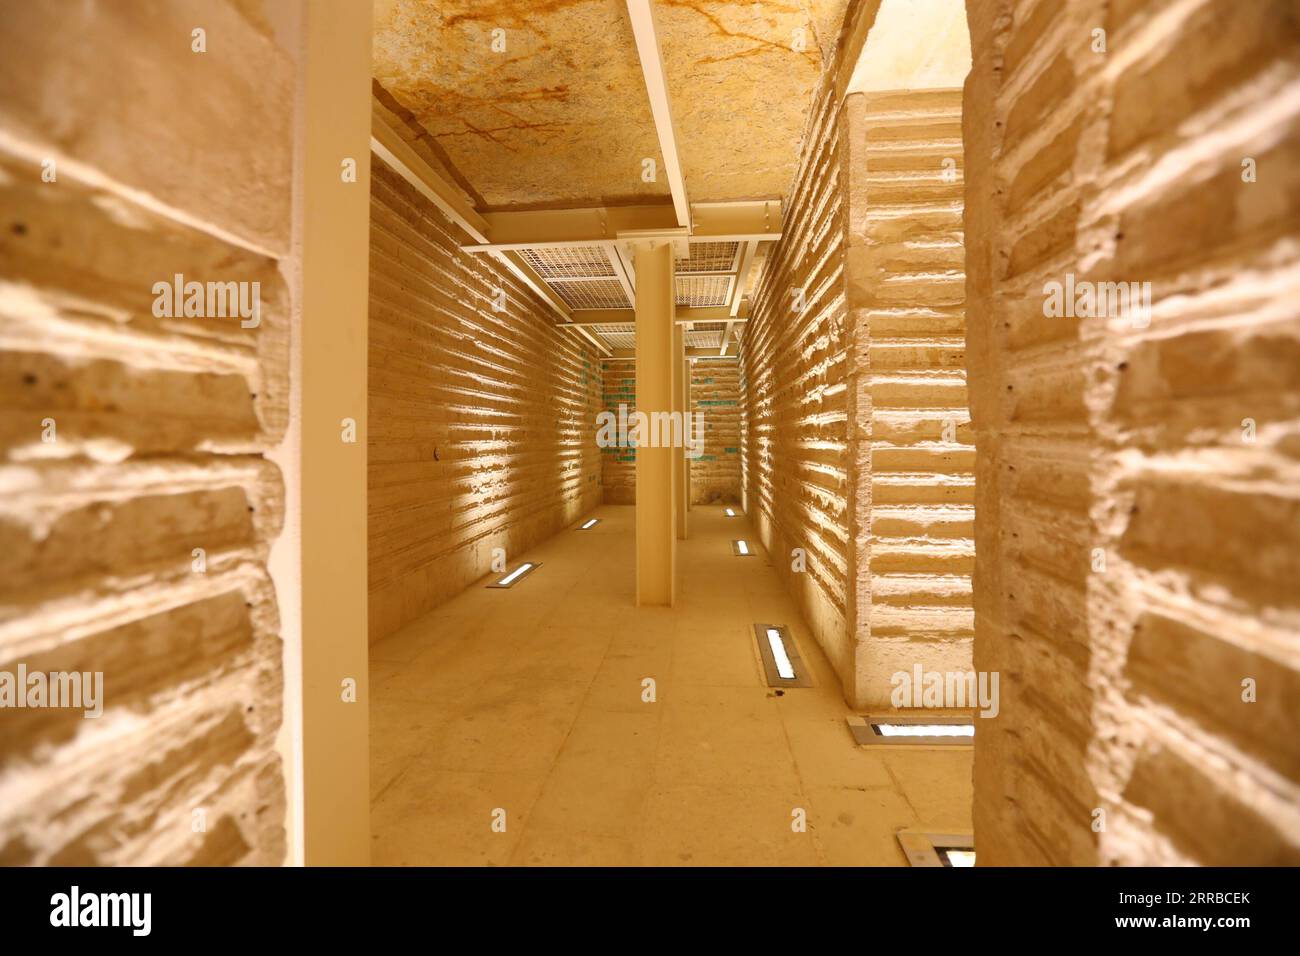 210914 -- SAQQARA, Sept. 14, 2021 -- Photo shows the interior of the south tomb of King Djoser in Saqqara necropolis, south of Cairo, Egypt, on Sept. 14, 2021. Egypt on Monday opened the south tomb of King Djoser after restoration in Saqqara necropolis near the capital Cairo. The restoration process started in 2006 and involved conservation and restoration work of the lower corridors, strengthening the walls and ceilings, complete the interior inscriptions in the tomb as reassembling the granite sarcophagus.  EGYPT-SAQQARA-SOUTH TOMB OF KING DJOSER-RESTORATION-OPEN SuixXiankai PUBLICATIONxNOTx Stock Photo